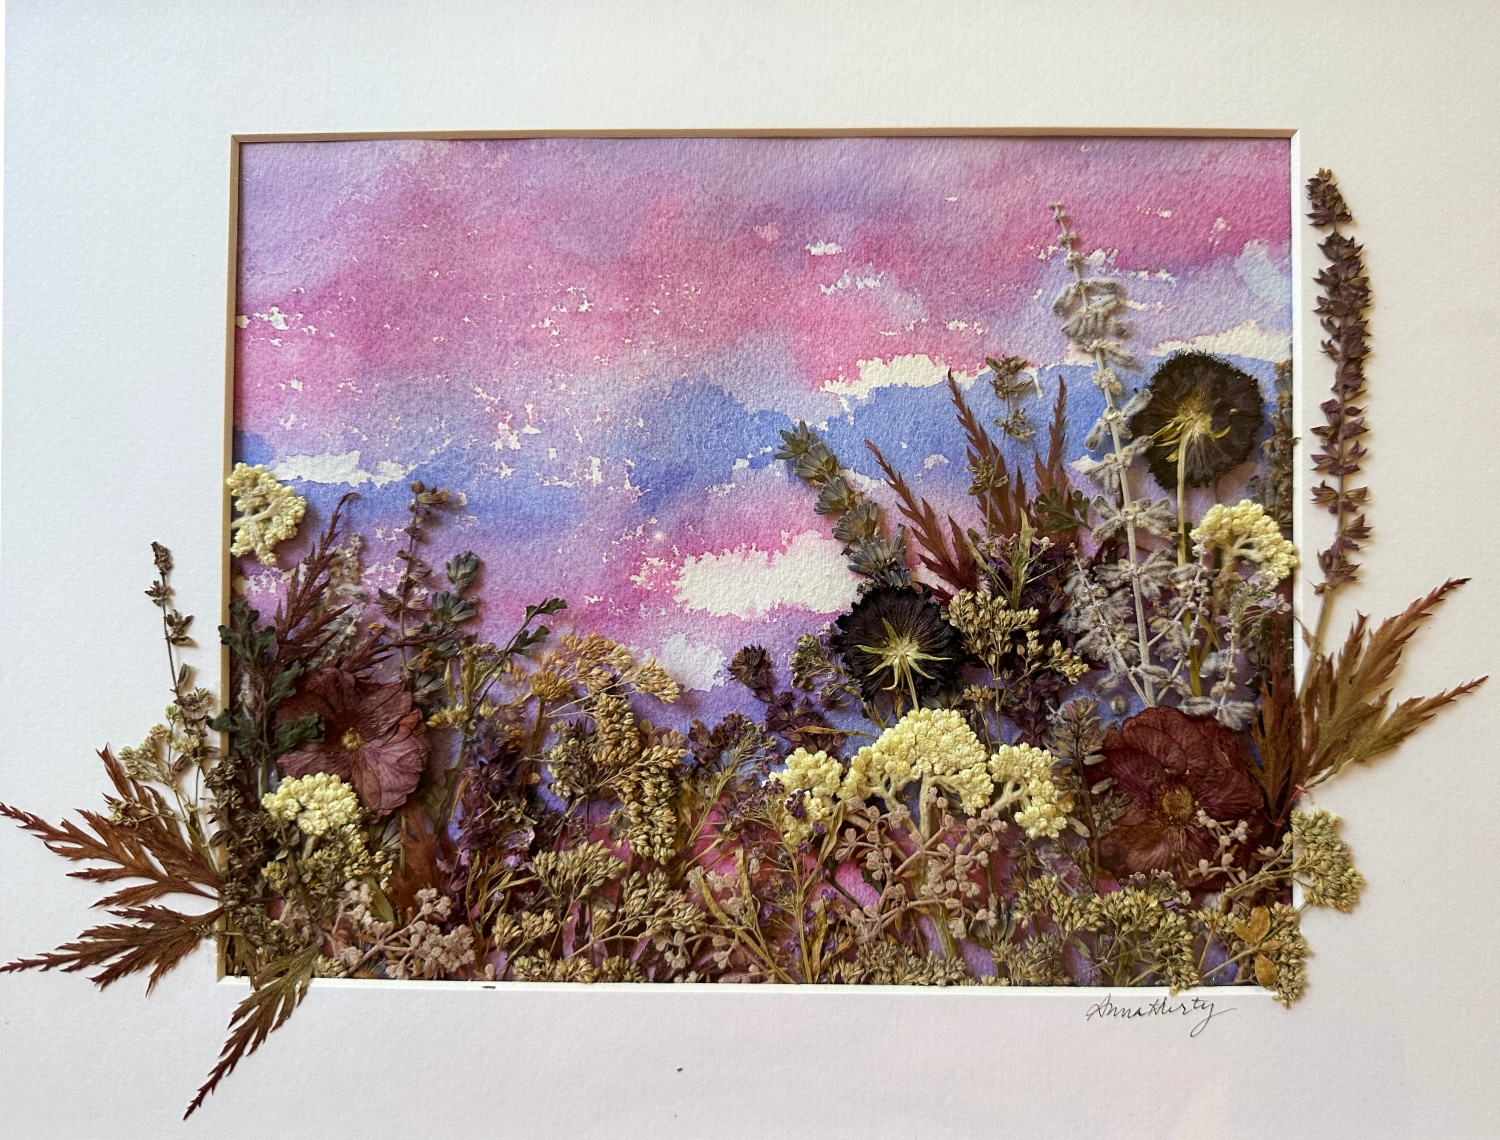 watercolor on paper and assembled dried plants :: $150.00